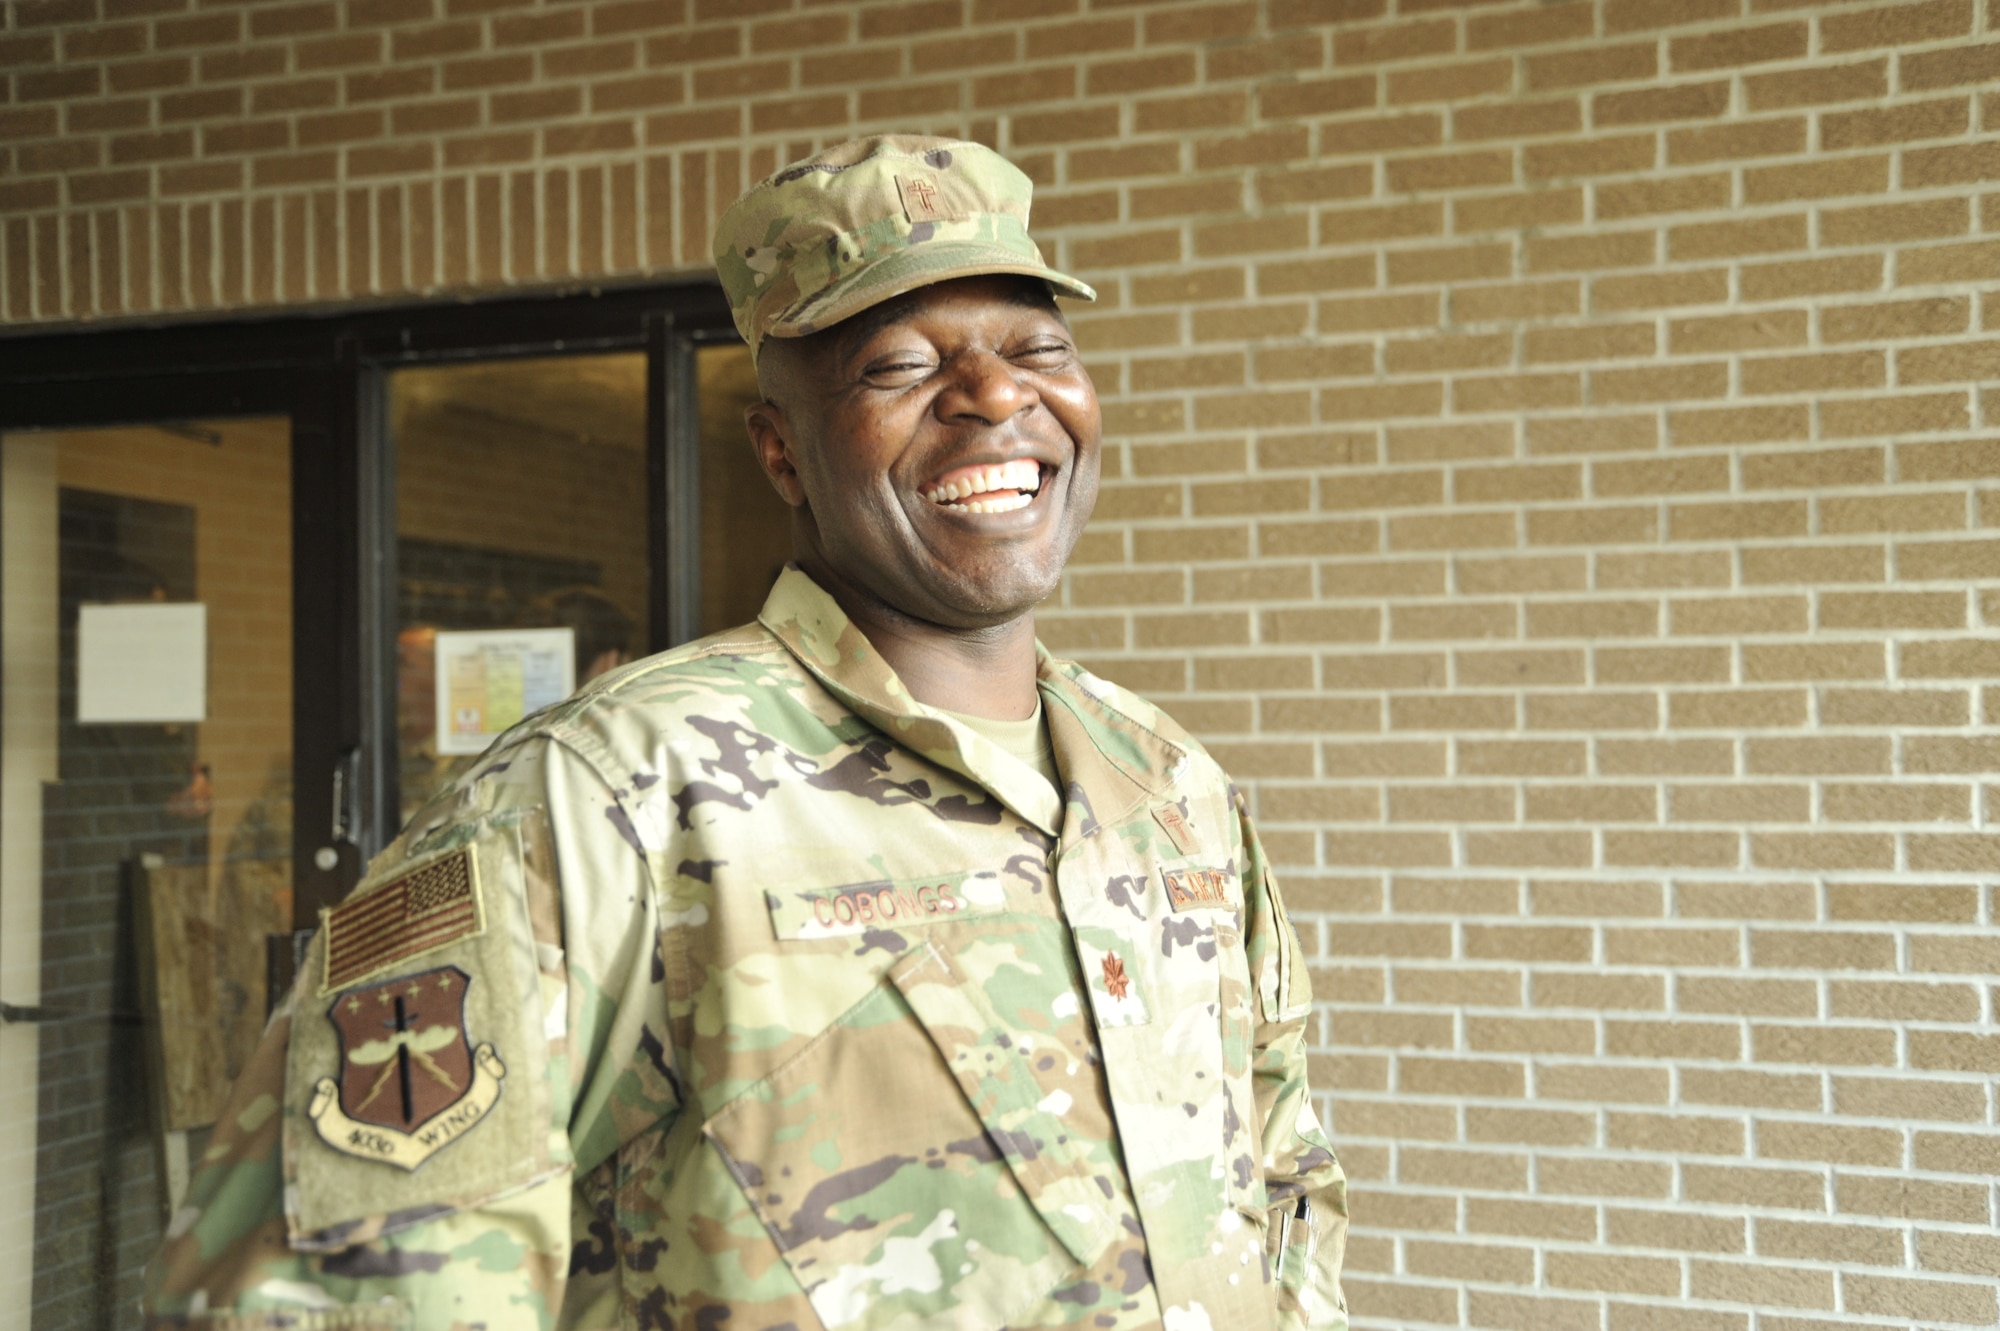 Major Bitrus B. Cobongs, 403rd Wing Chaplain smiles as he prepares to attend a 403rd Wing Staff meeting, Oct. 5, 2019 at Keesler Air Force Base, Miss. Cobongs advises leadership on religious and spiritual matters, moral welfare, conducts unit ministry, counseling, and pastoral care for the Reserve Citizen Airmen of 403rd Wing. (U.S. Air Force photo by TSgt. Michael Farrar)